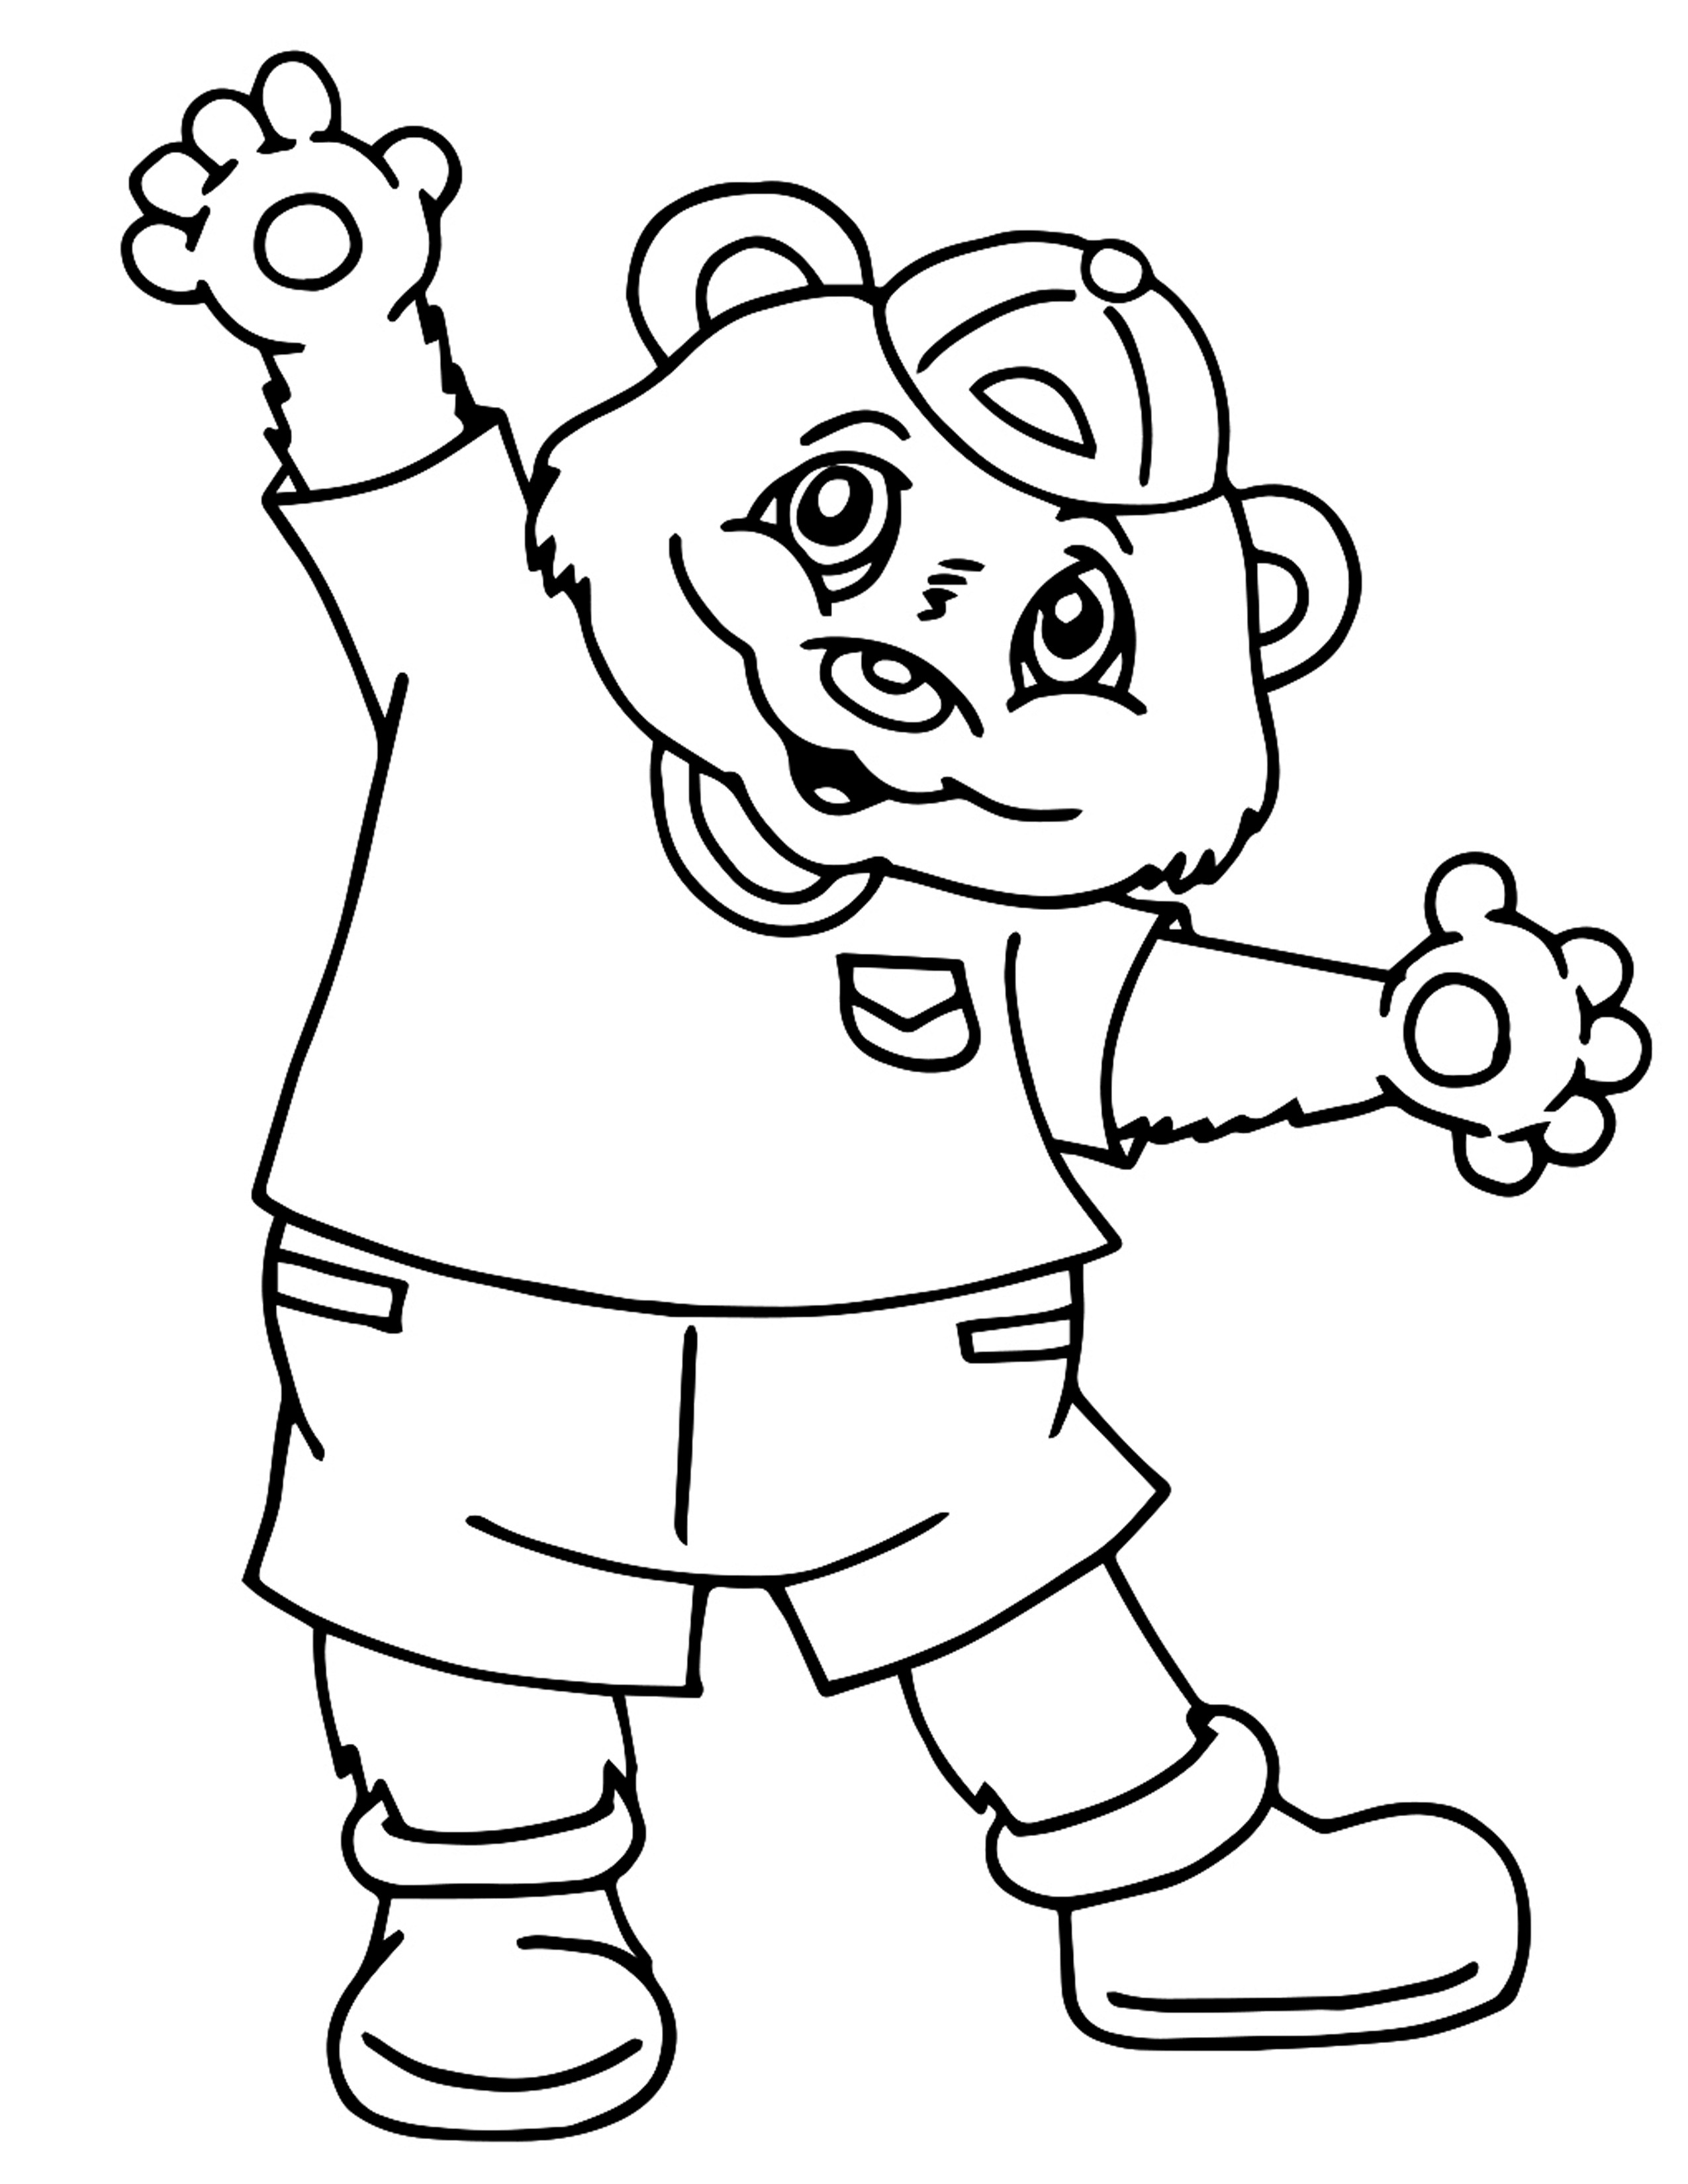 Niki Coloring Pages For Boys
 Hip Hop Dancer Drawing at GetDrawings